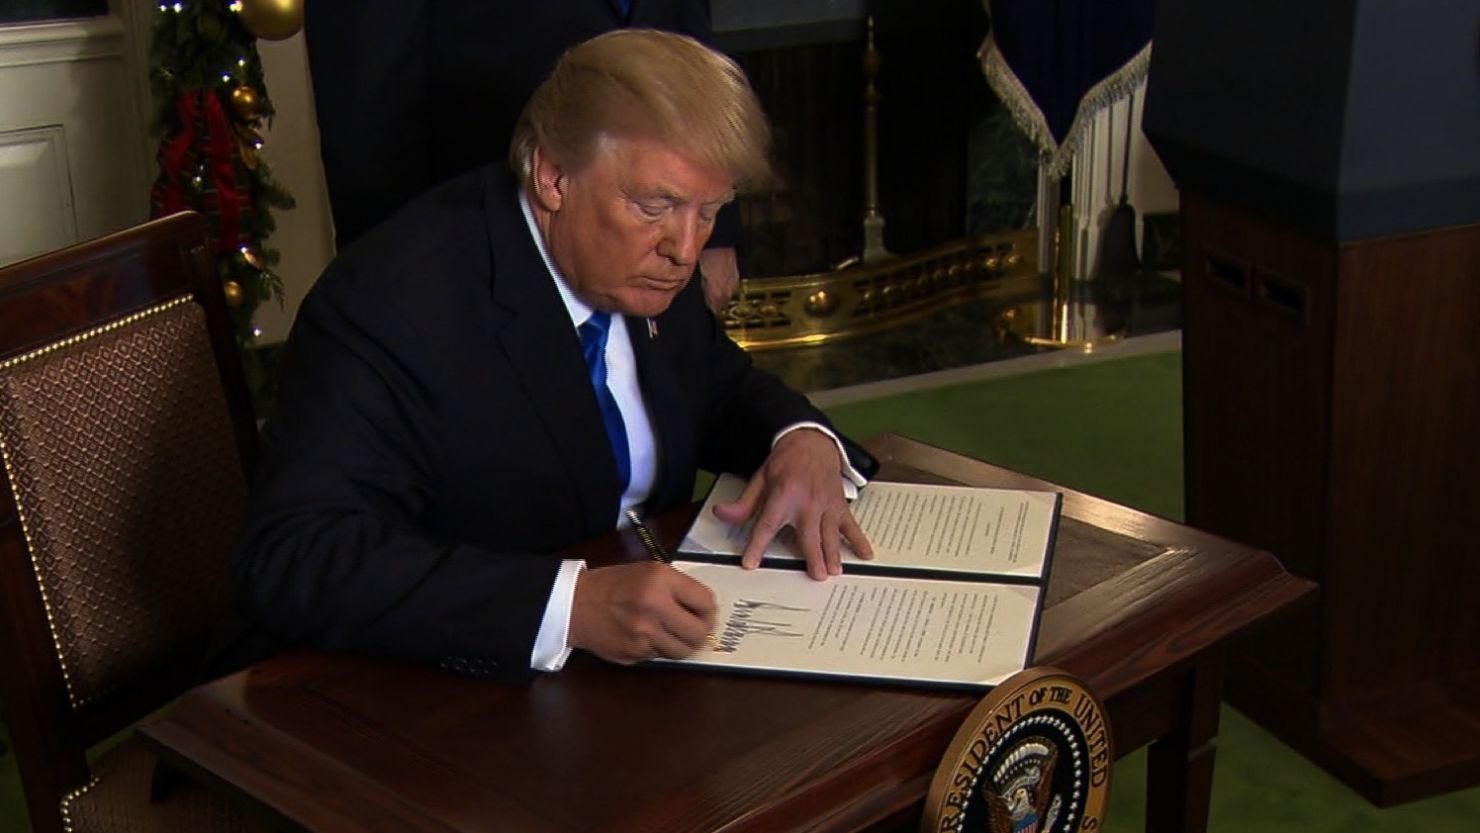 US President Donald Trump photographed signing the US's official recognition of Jerusalem as Israel's capital in this December photo.